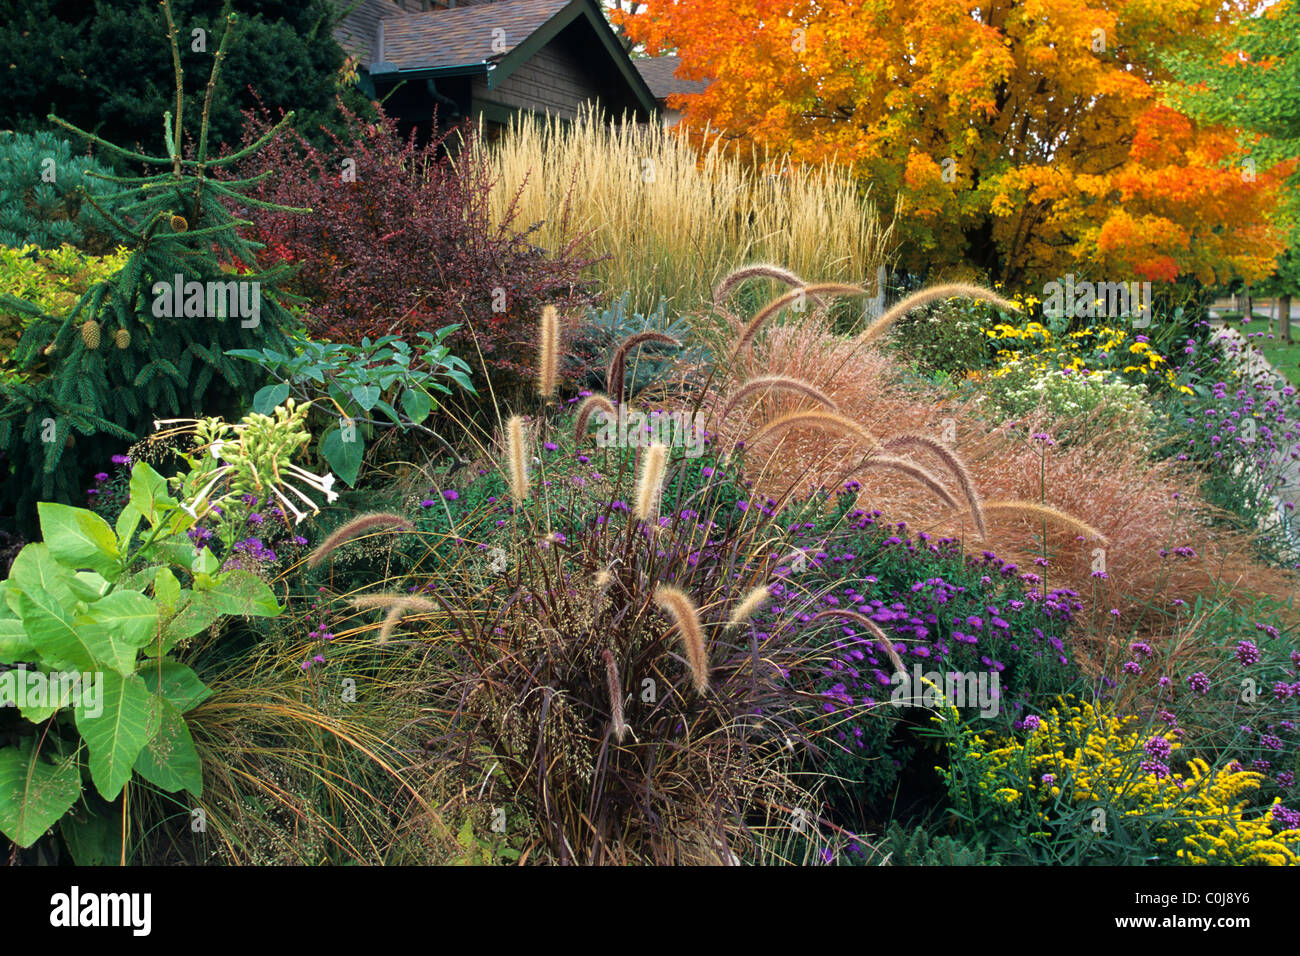 FRONT YARD GARDEN IN OCTOBER INCLUDES PURPLE AND FEATHER ORNAMENTAL GRASSES, GOLDENROD, PURPLE DOME ASTER AND MONTANA MAPLE. Stock Photo